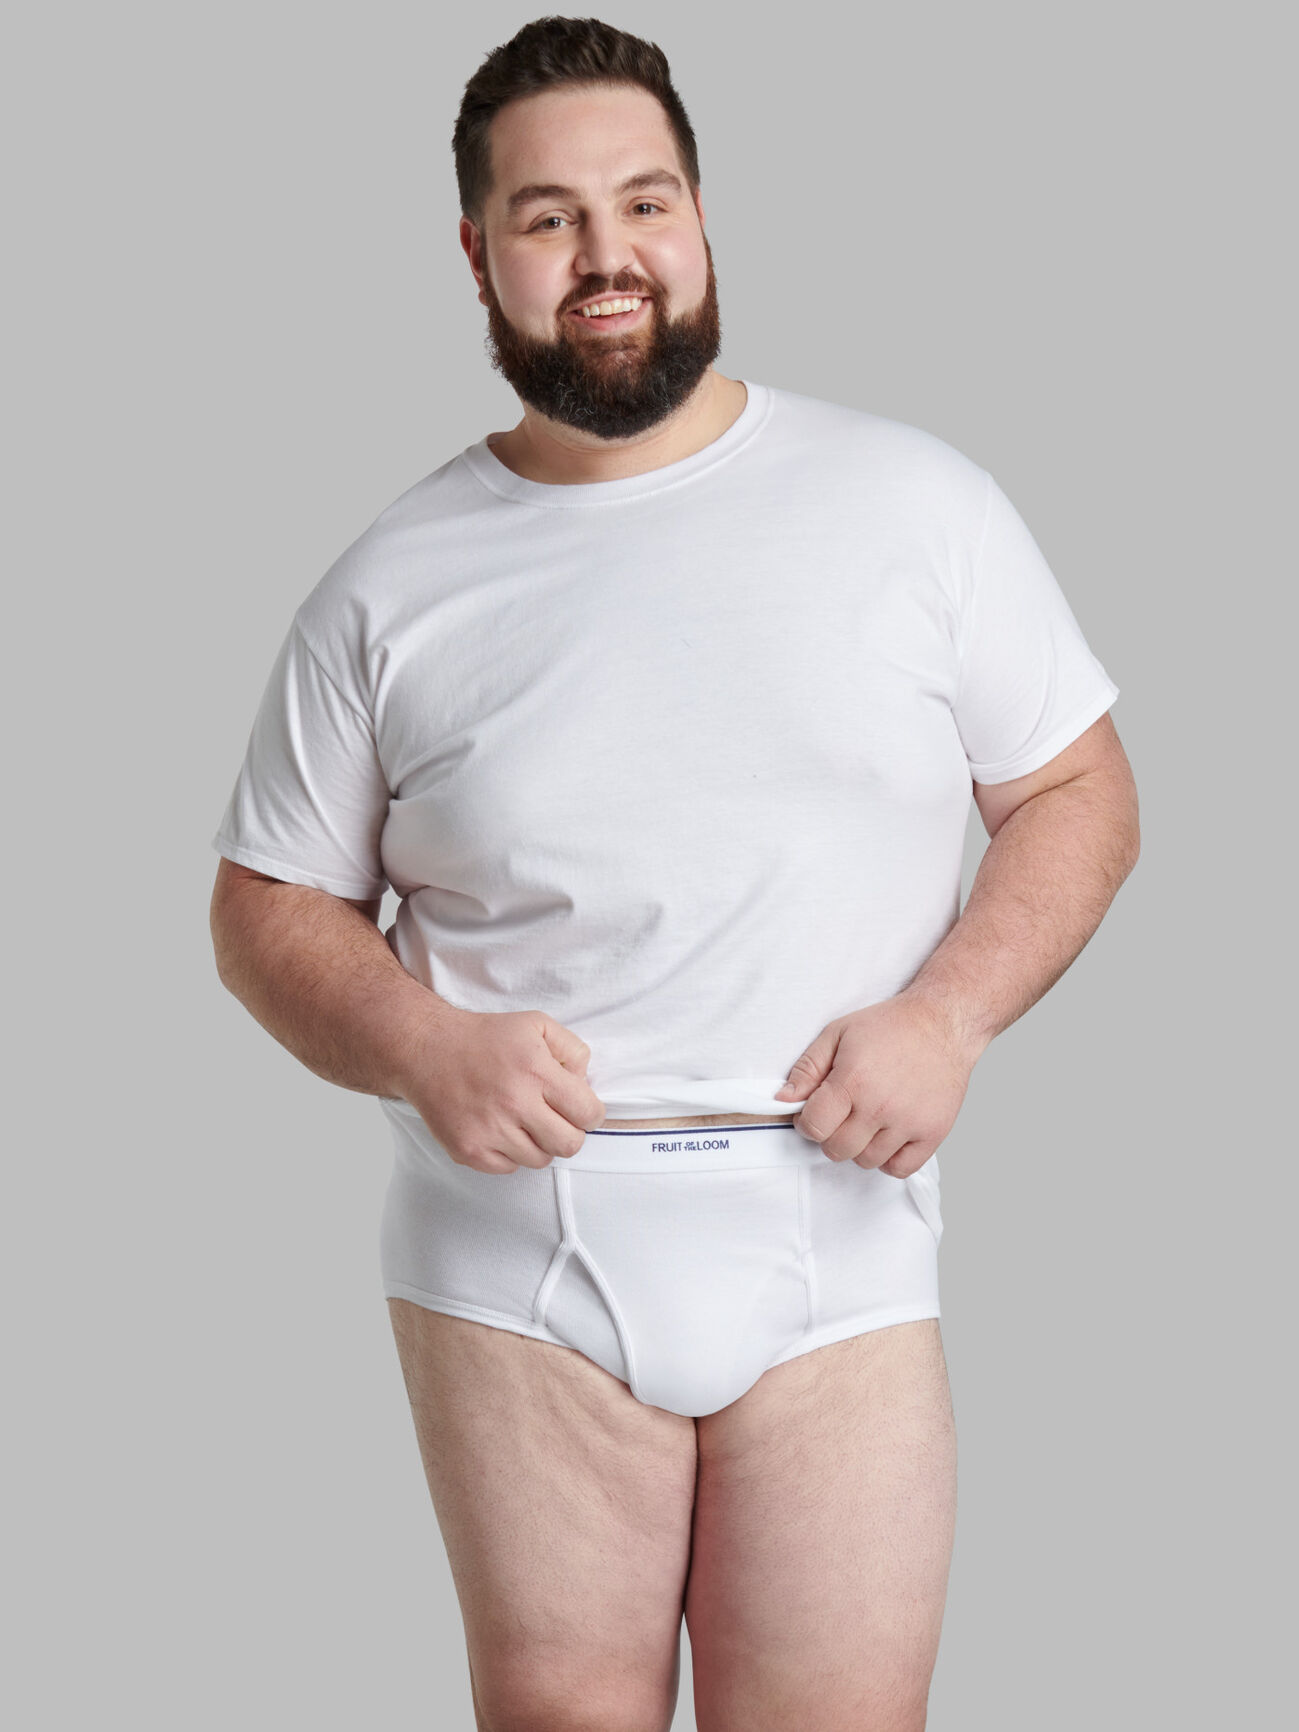 Buy Pack of 3 pairs of plus size eco-design boxer shorts Online in